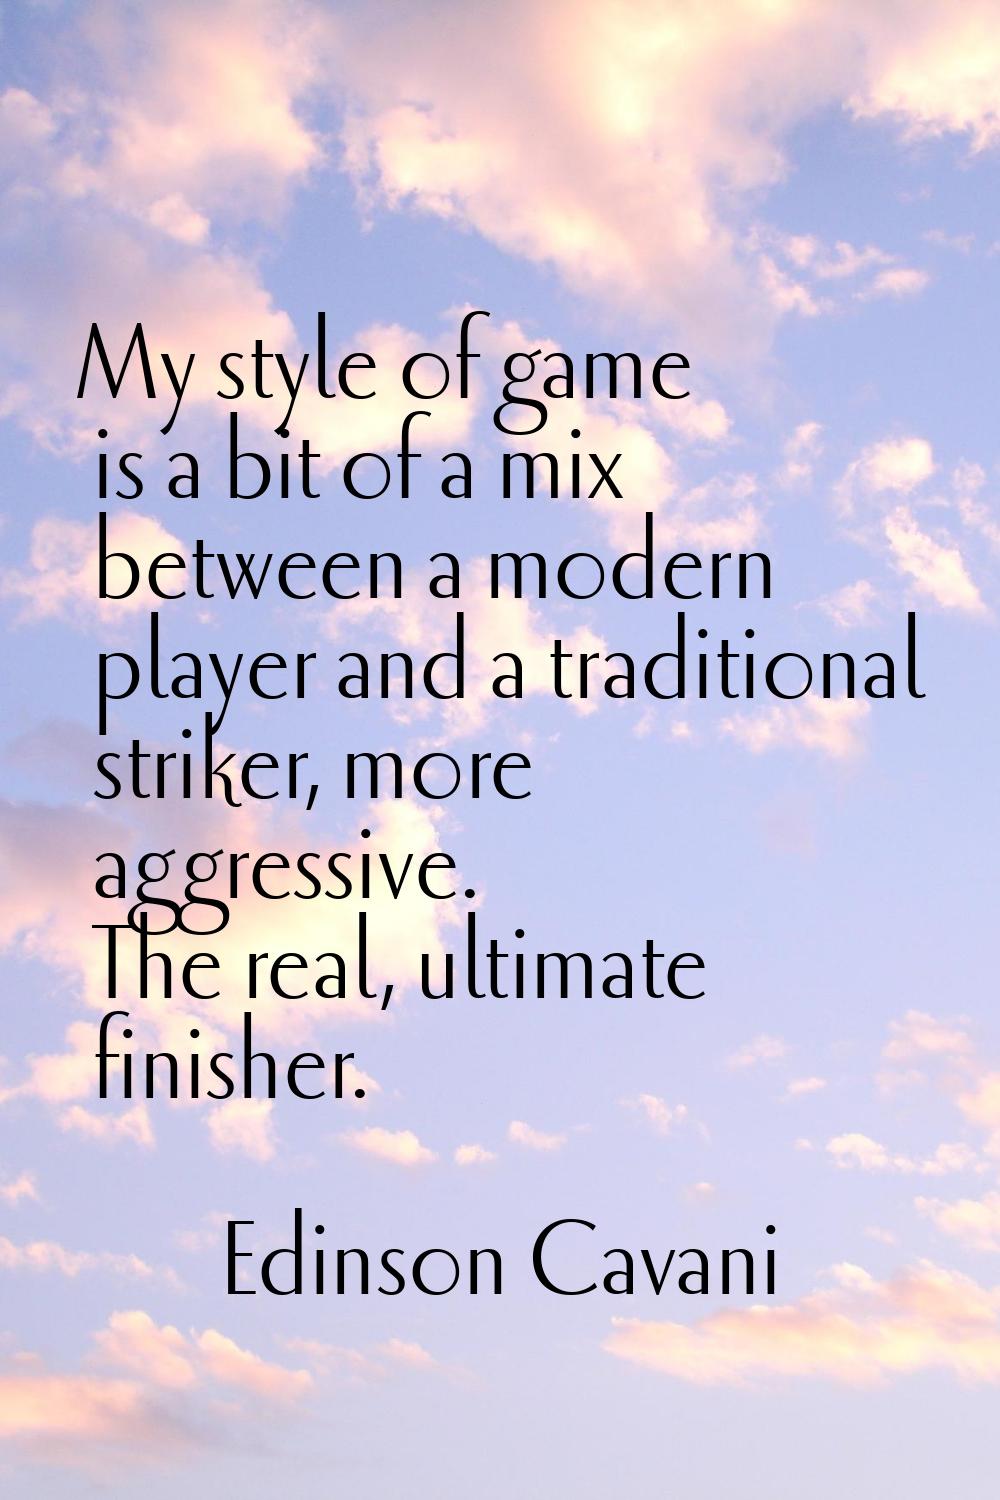 My style of game is a bit of a mix between a modern player and a traditional striker, more aggressi